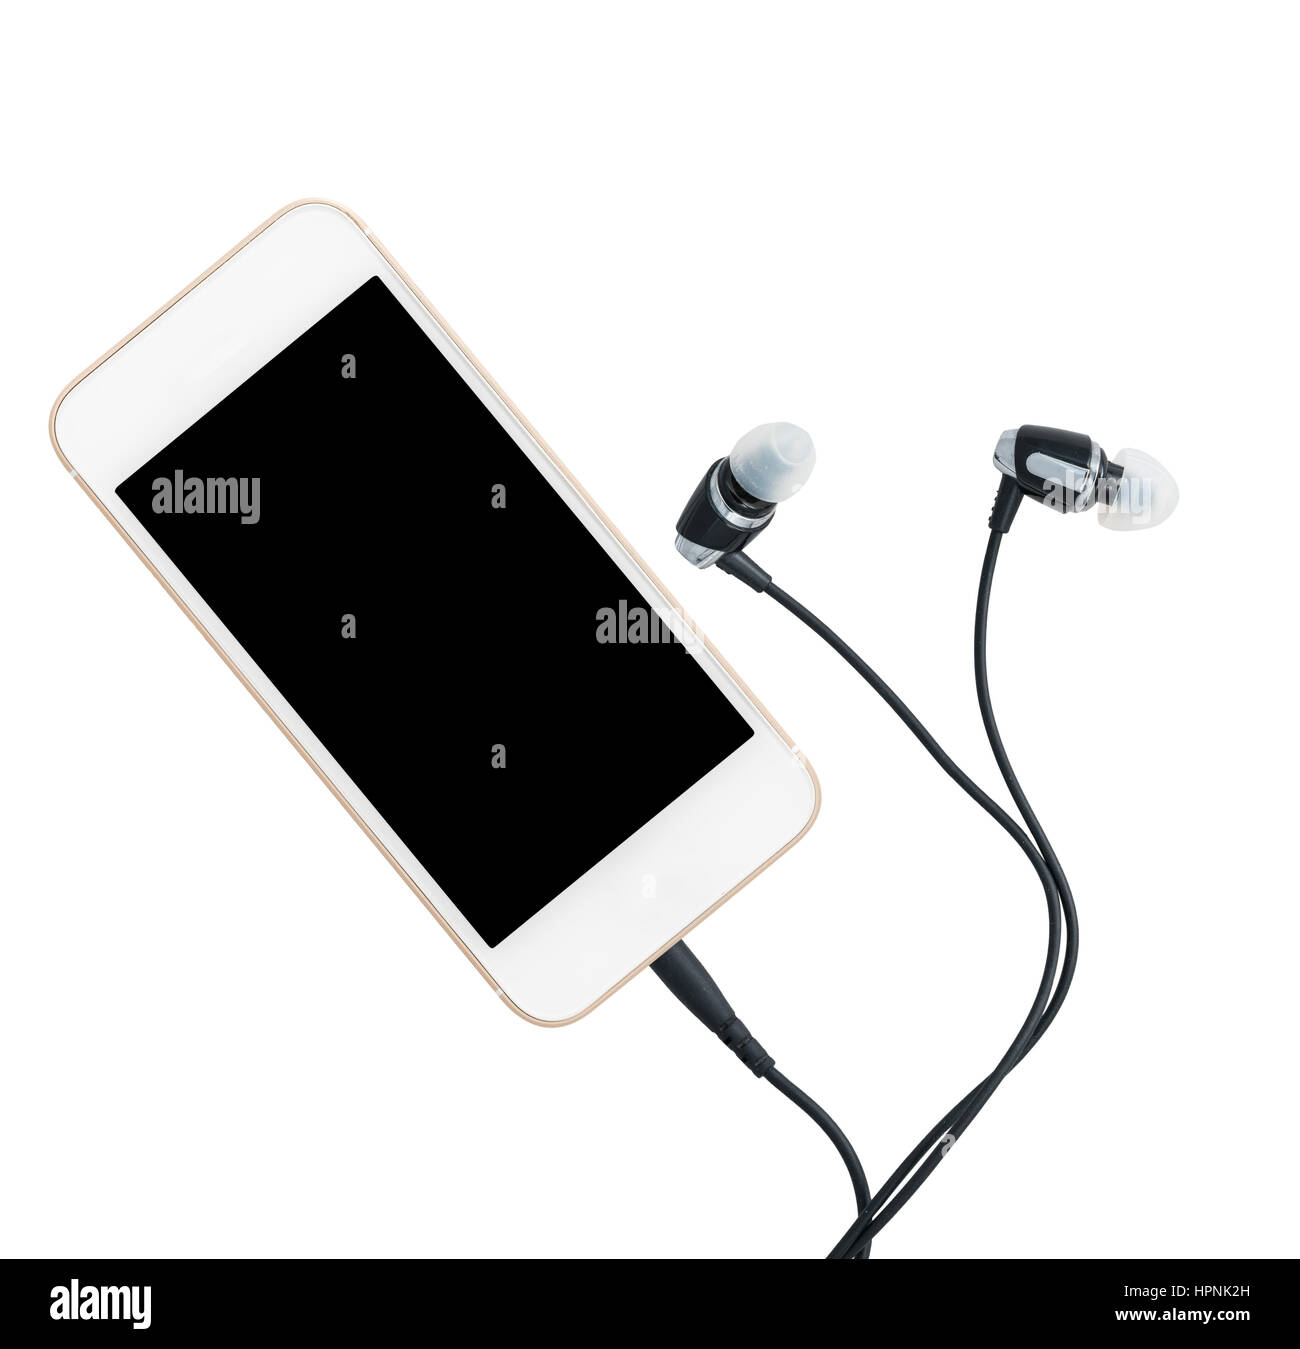 MP3 digital music player built into smartphone or mobile phone with earbuds isolated against a white background Stock Photo